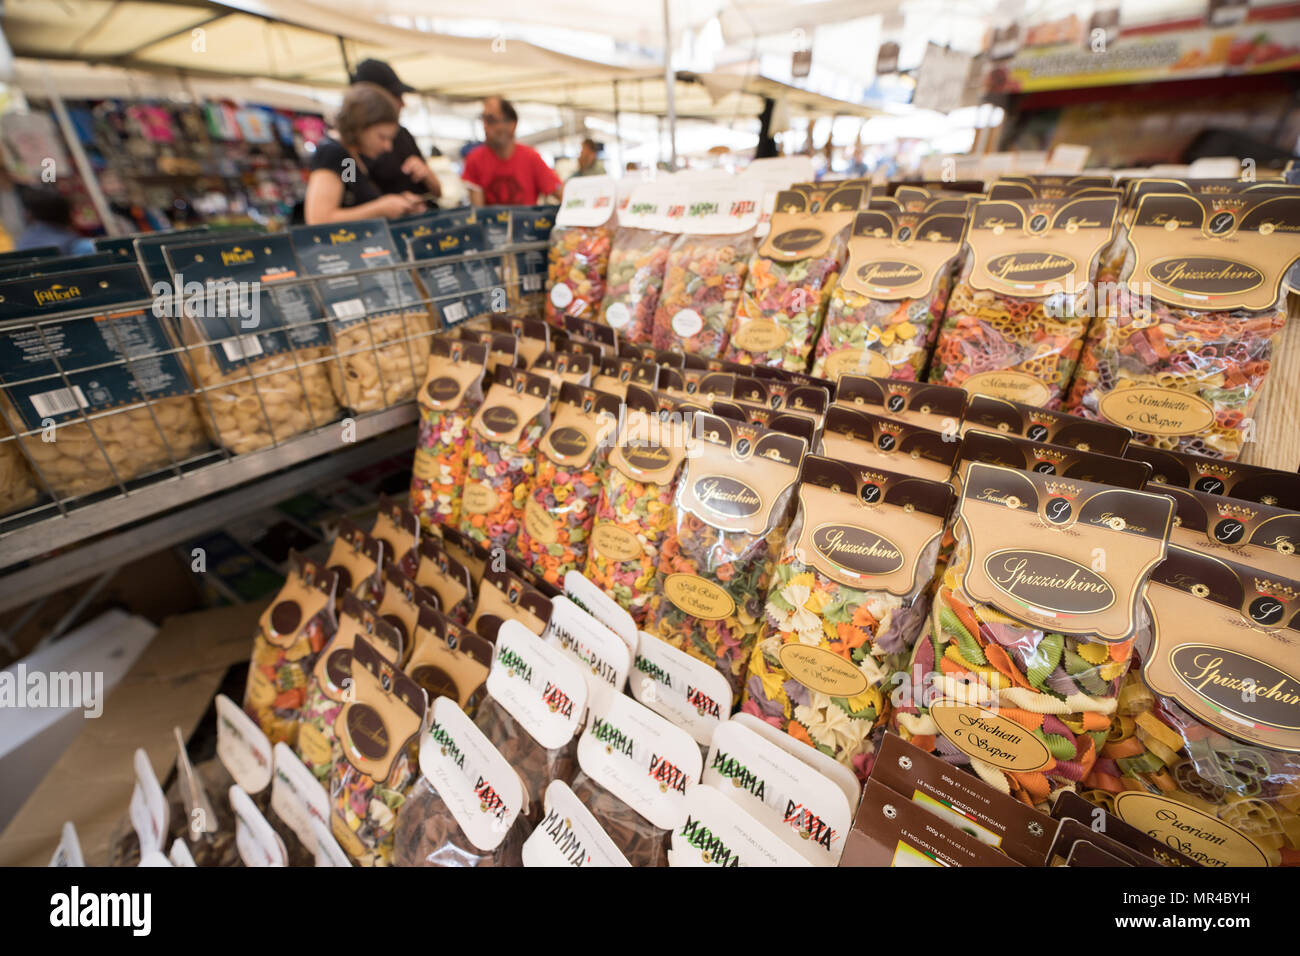 Stall of Typical food product displayed in in Campo de Fiori Market Rome Italy Stock Photo